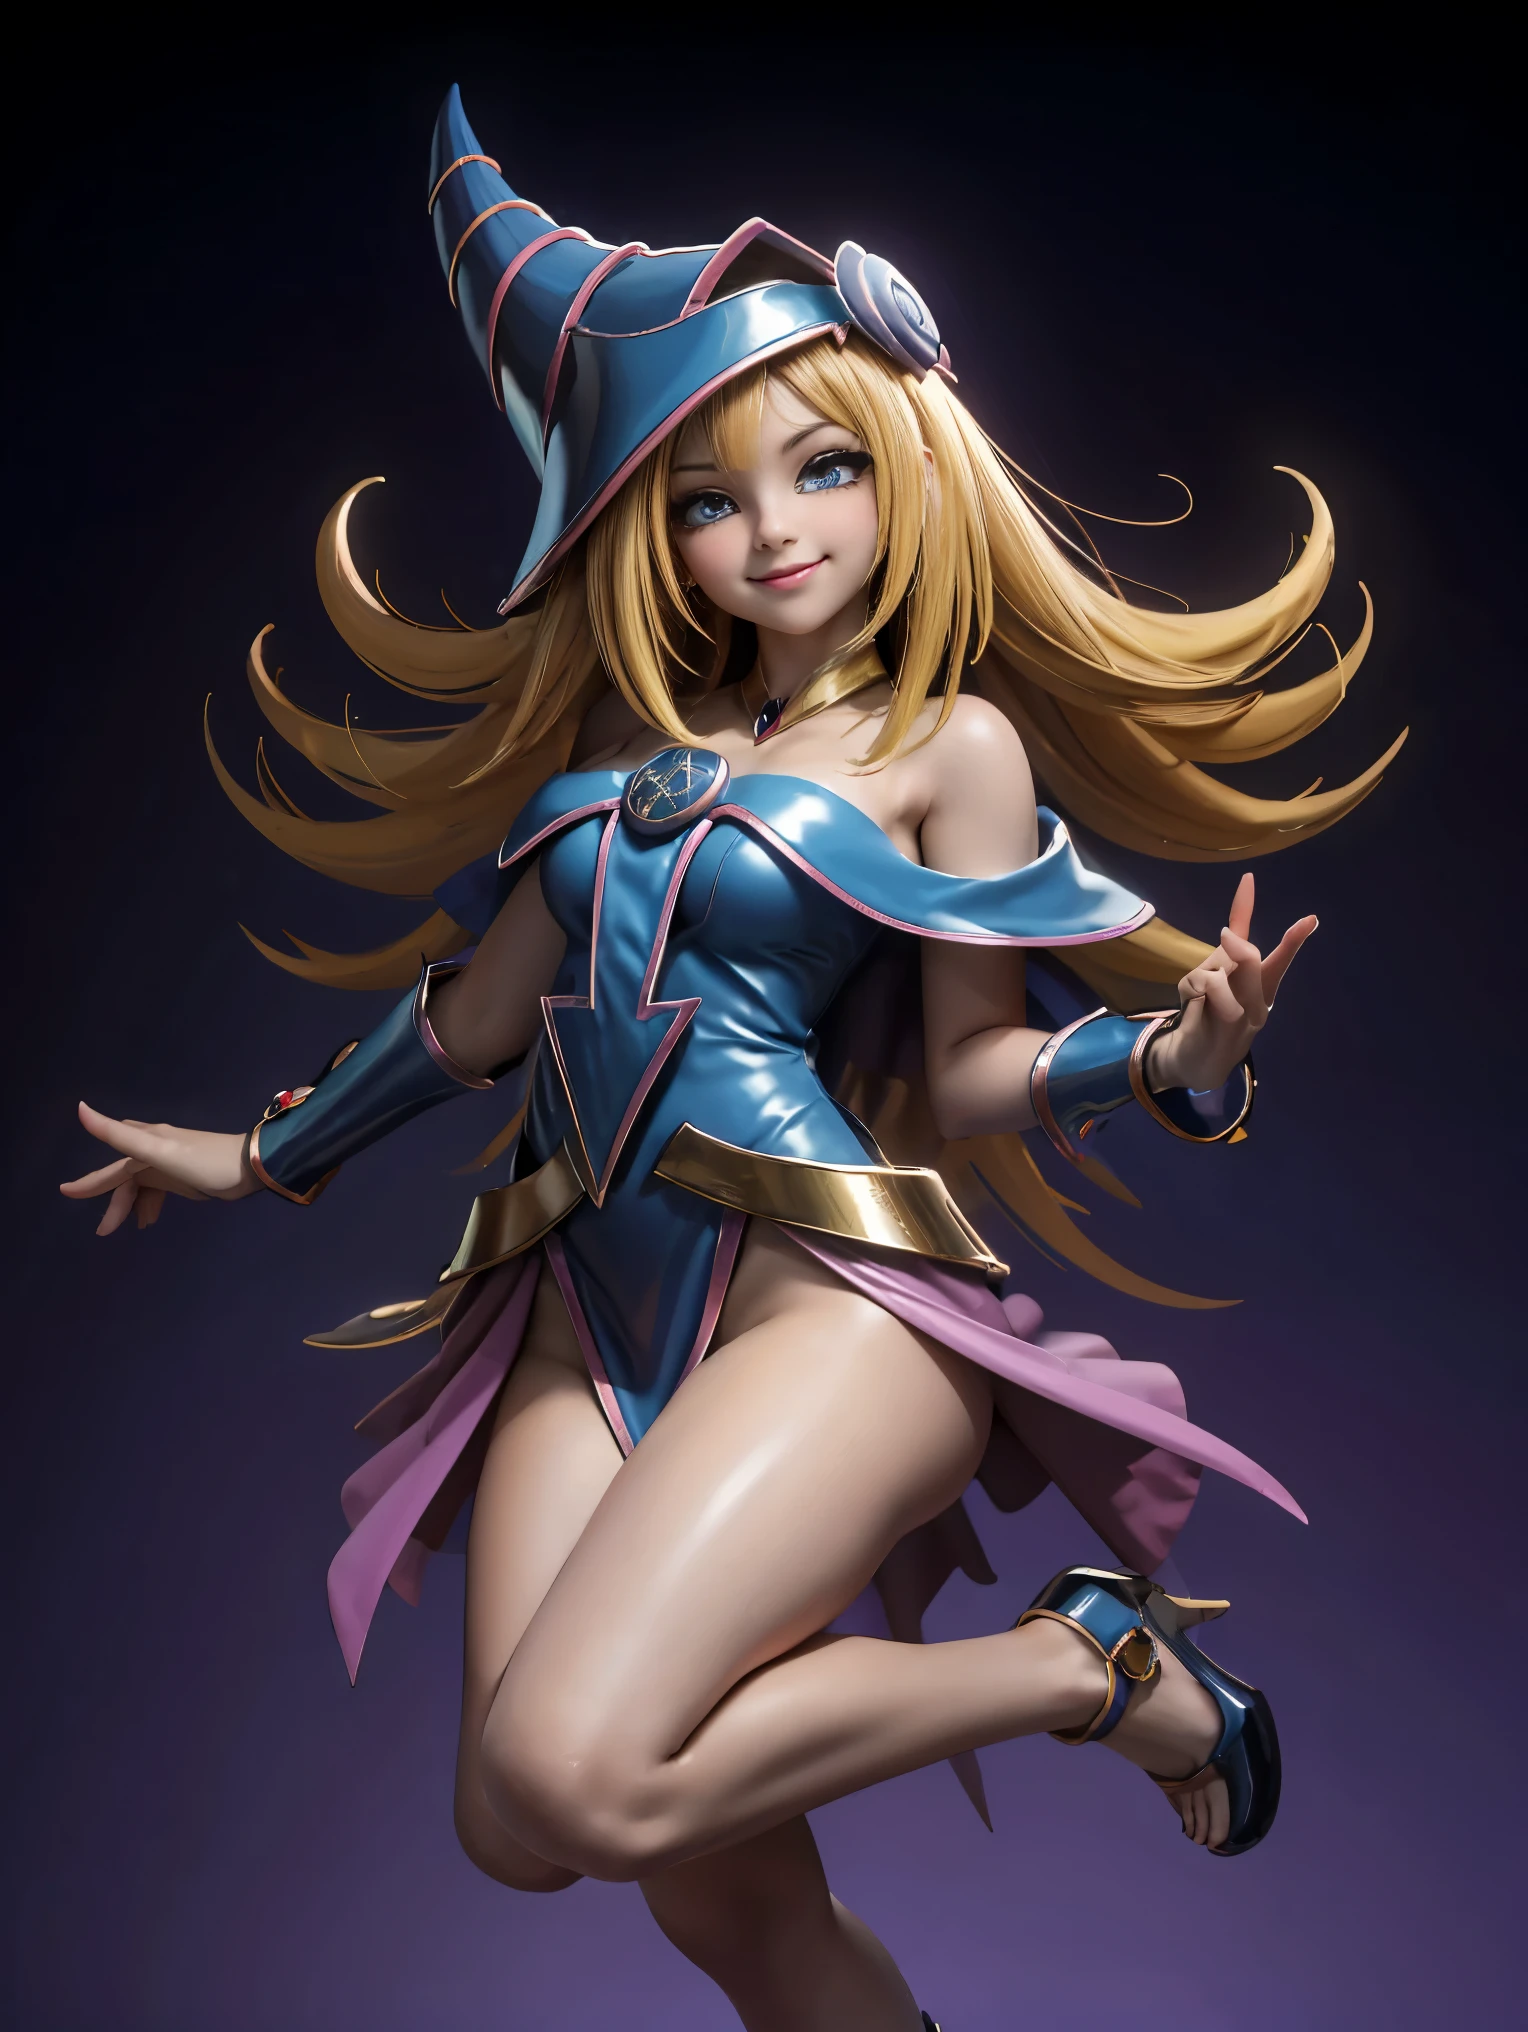 Dark magician gils in the air, she is standing jumping, Magic hearts background. smile on his lips. blue eyes. Golden hair. pose sensual. Levitating on one foot. has heels. 1.1 Wear heels azules y dorados . Wear heels 